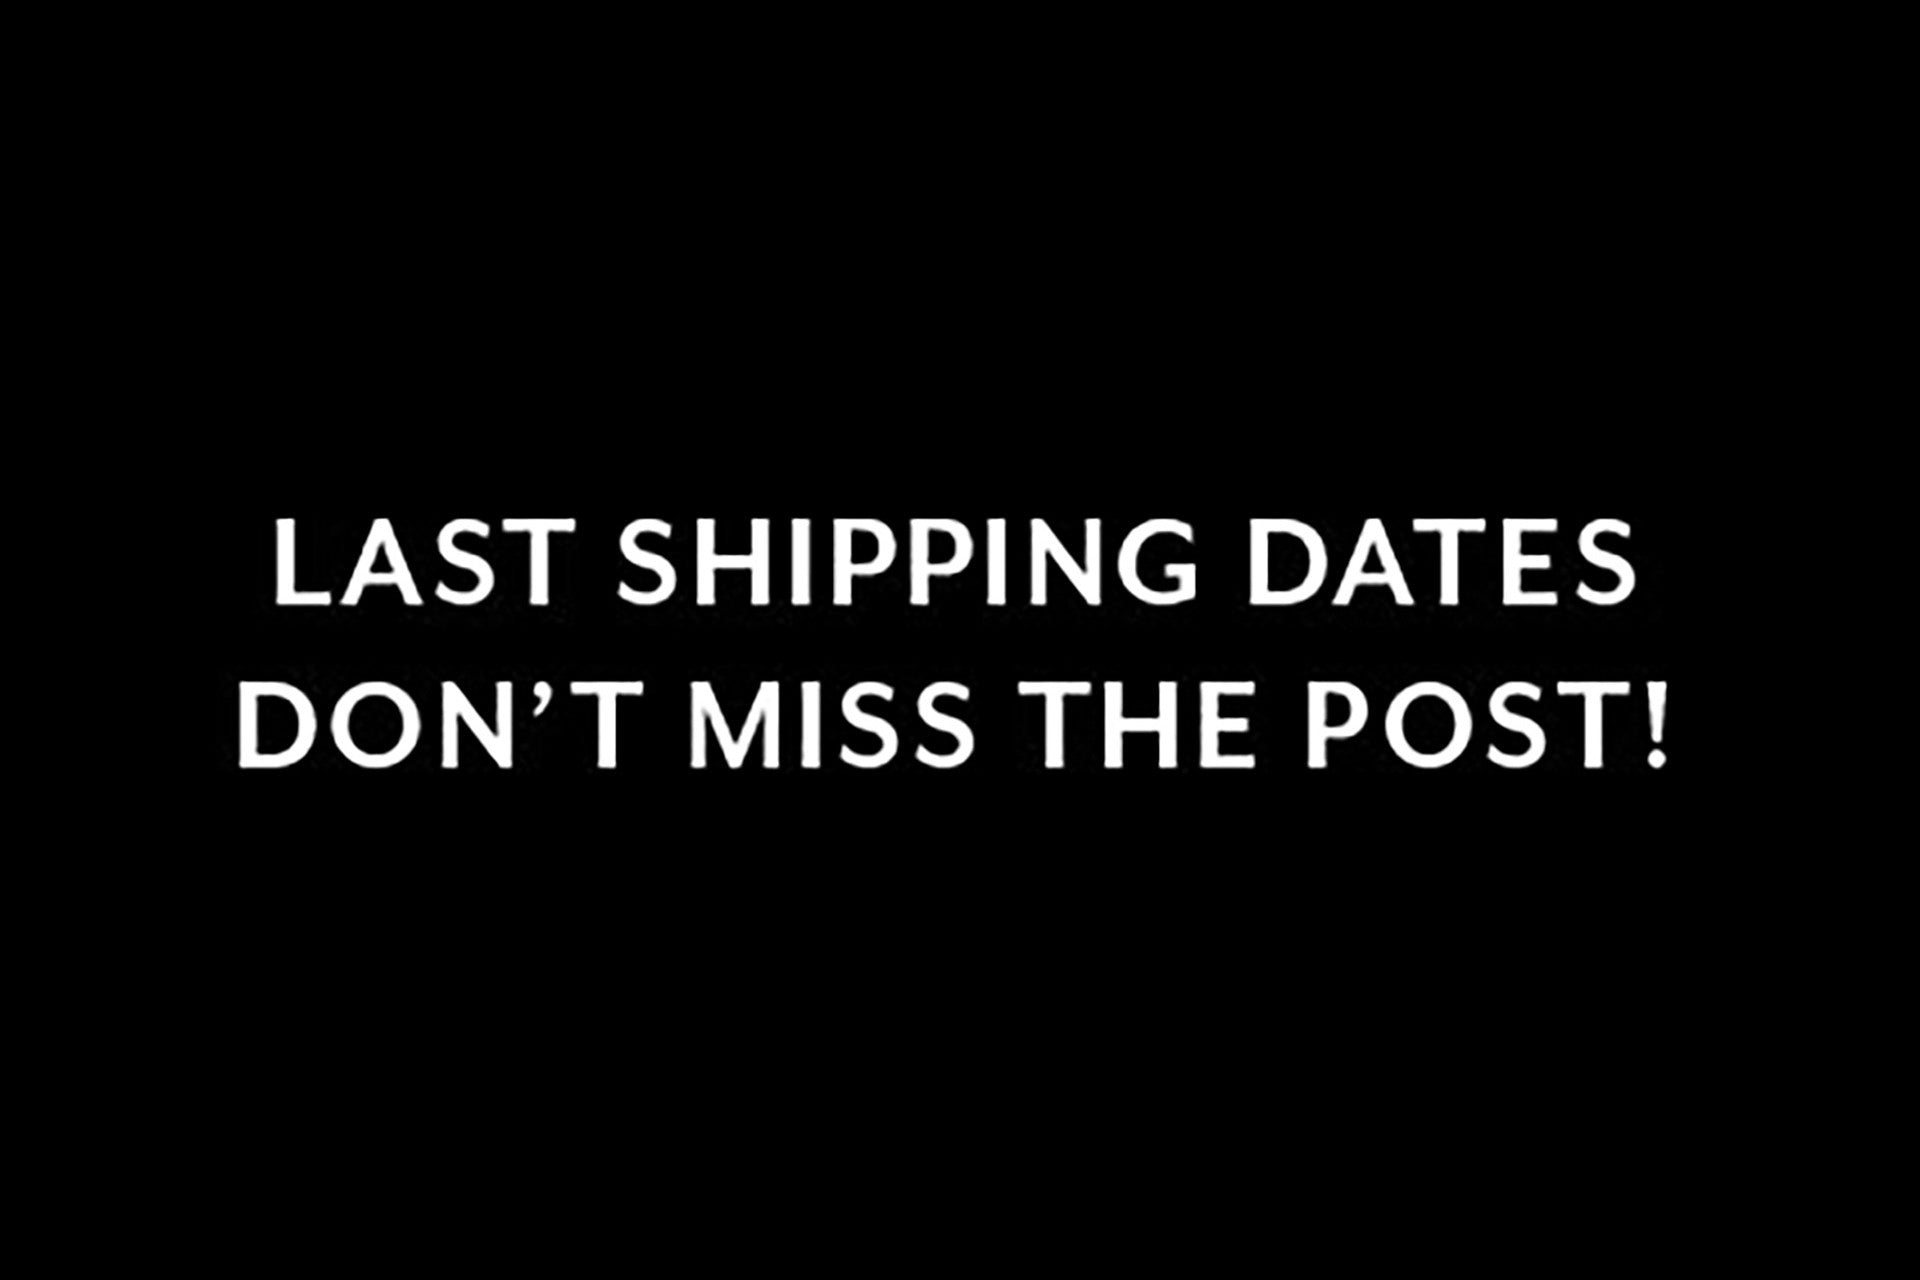 SPECIAL EVENT: LAST SHIPPING DATES PRE XMAS